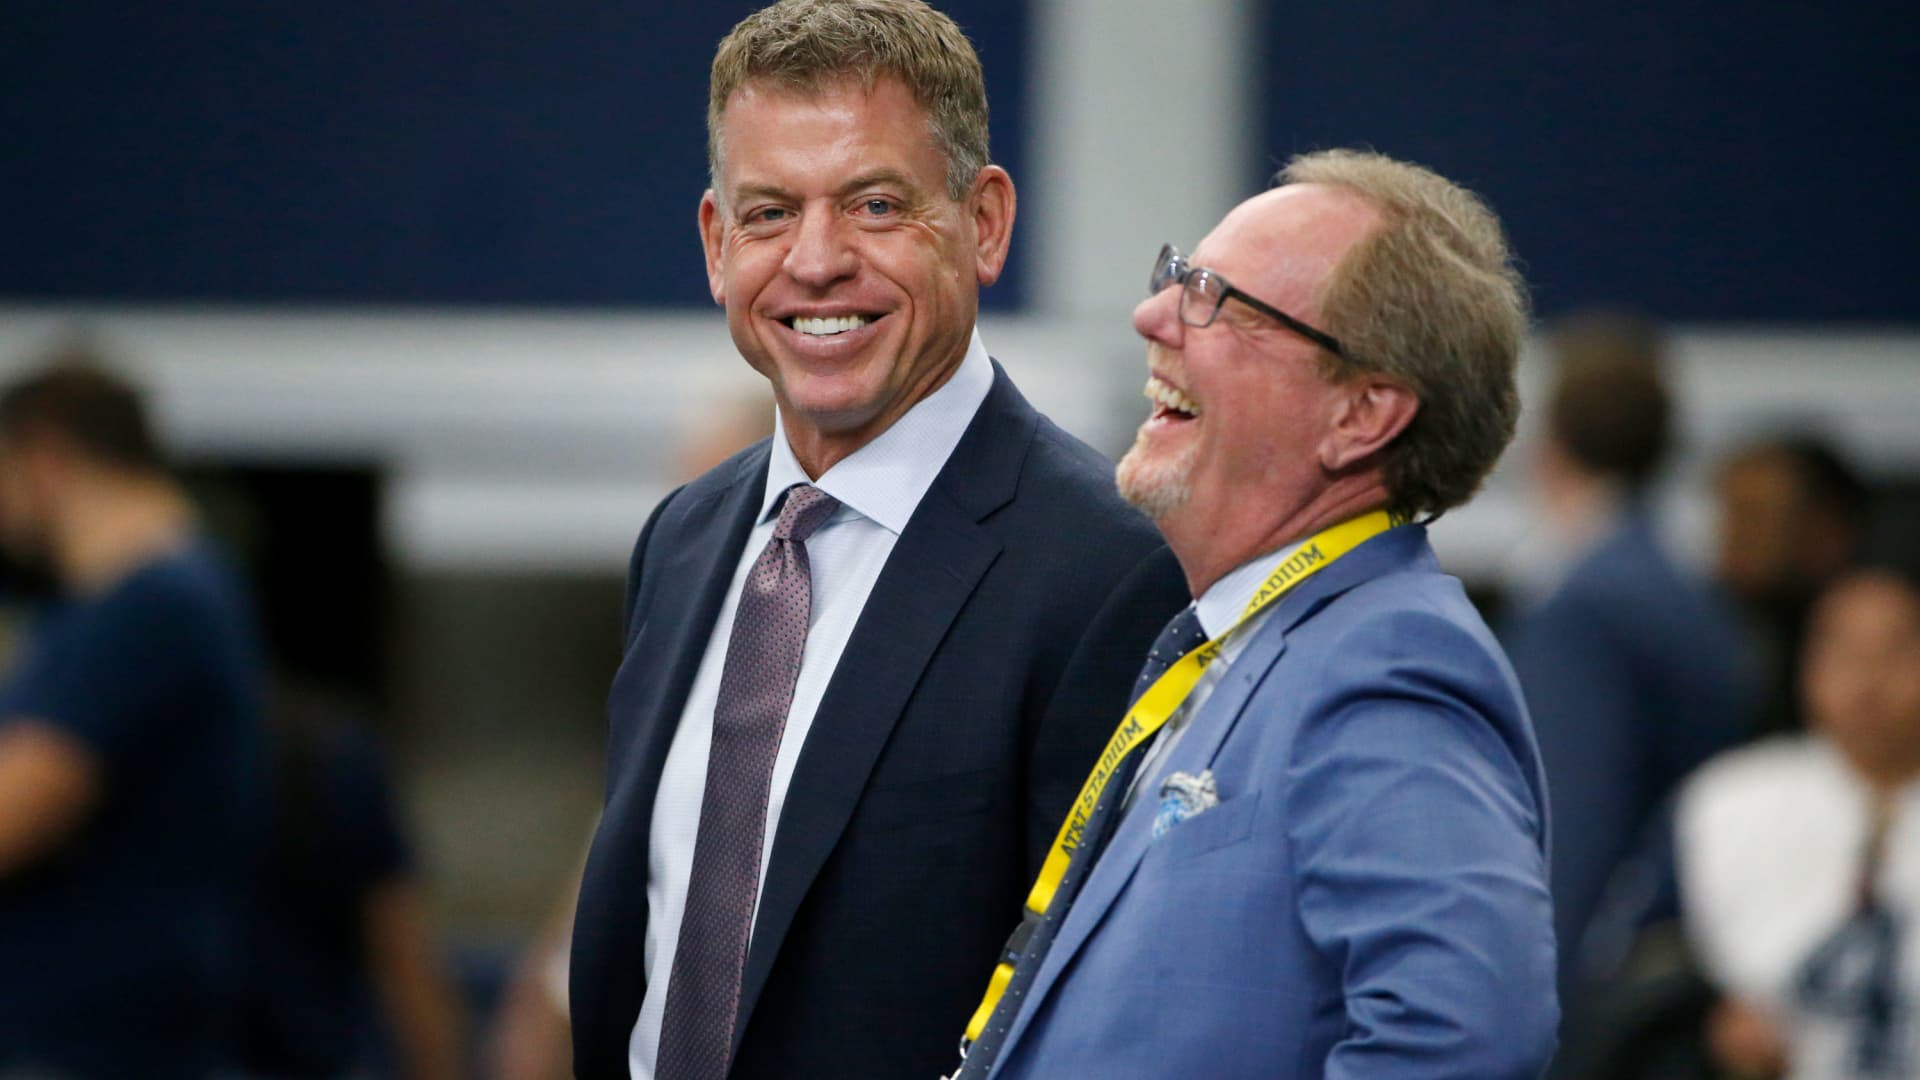 Broadcast personality Troy Aikman, left, talks with sports reporter Ed Werder, right, before a NFL football game between the New York Giants and Dallas Cowboys in Arlington, Texas, Sunday, Sept. 8, 2019.